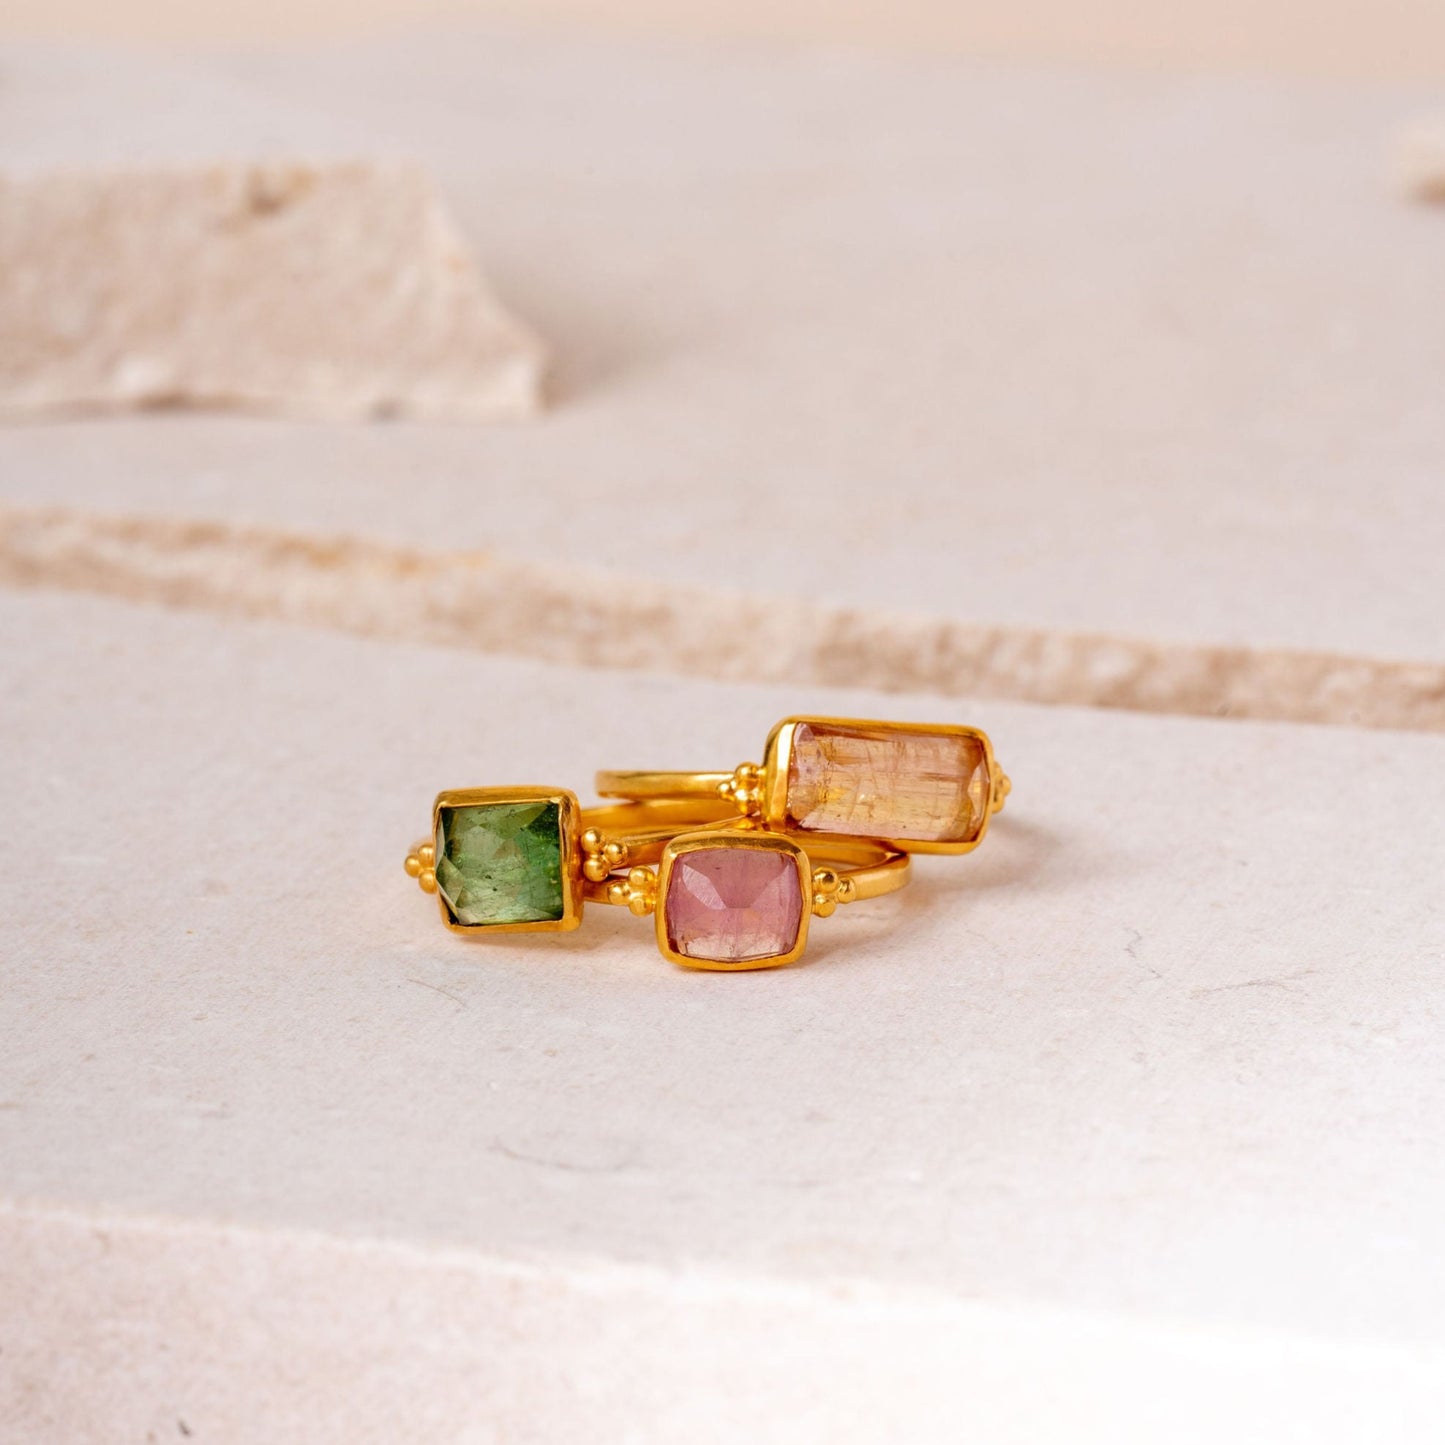 Handcrafted gold ring collection featuring a standout rectangular tourmaline design.